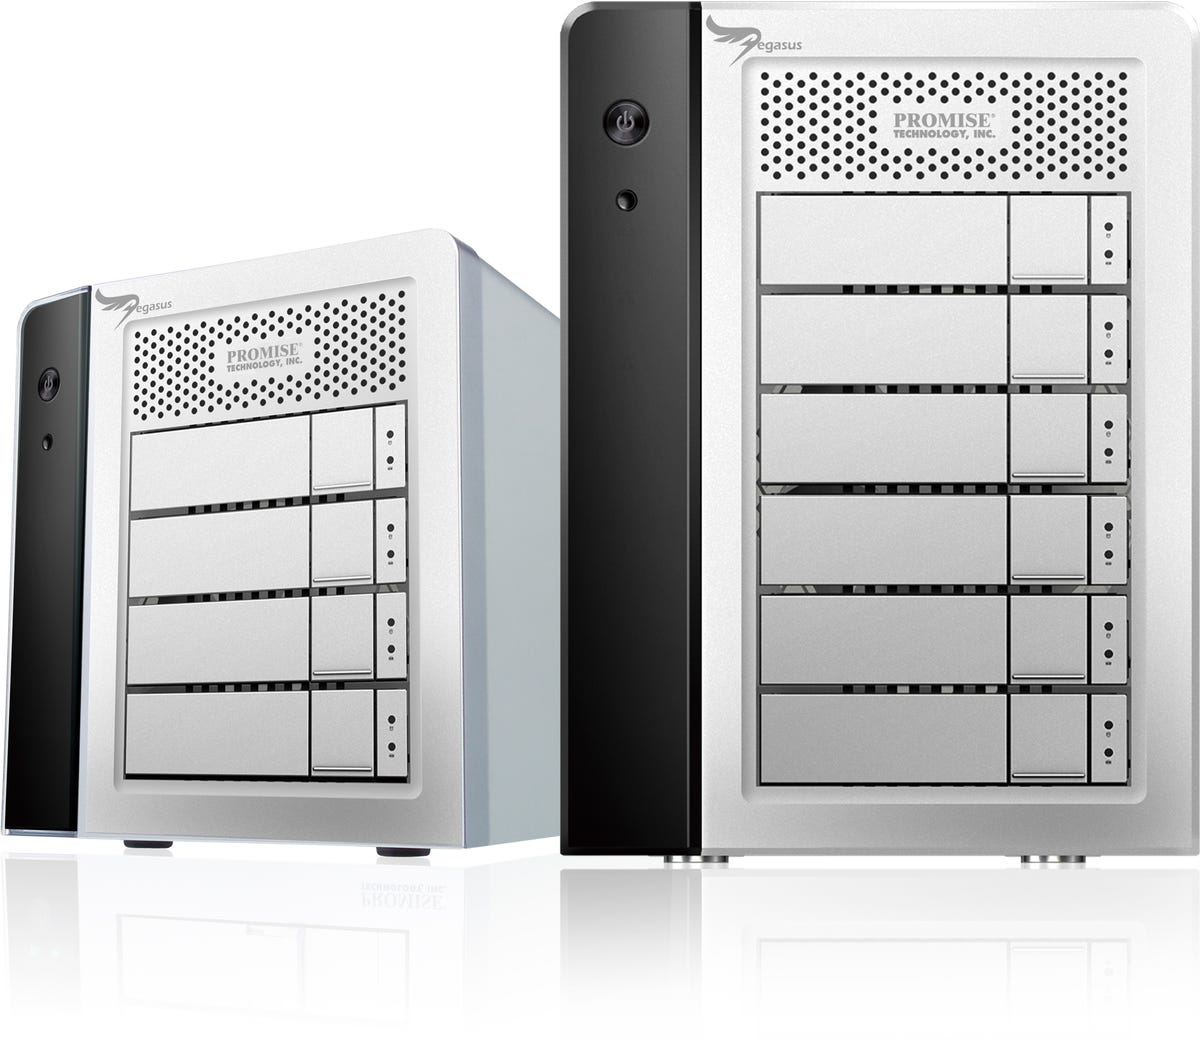 The new Thunderbolt-enabled Pegasus storage solutions from Promise.